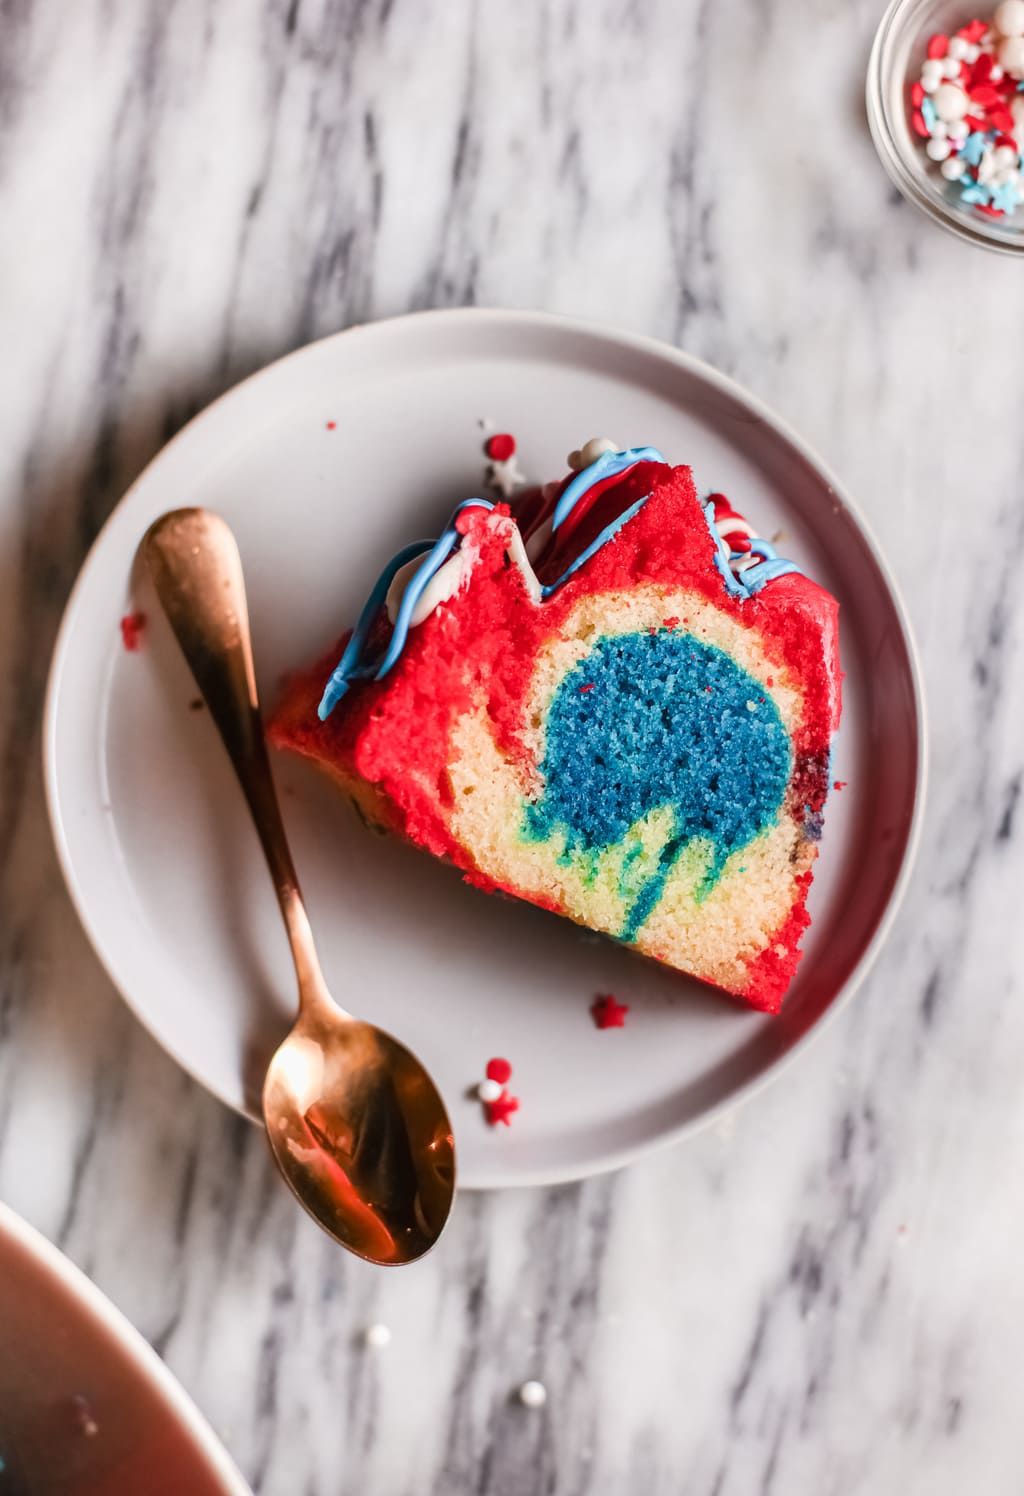 a slice of Firecracker cake looking at the color inside with a spoon